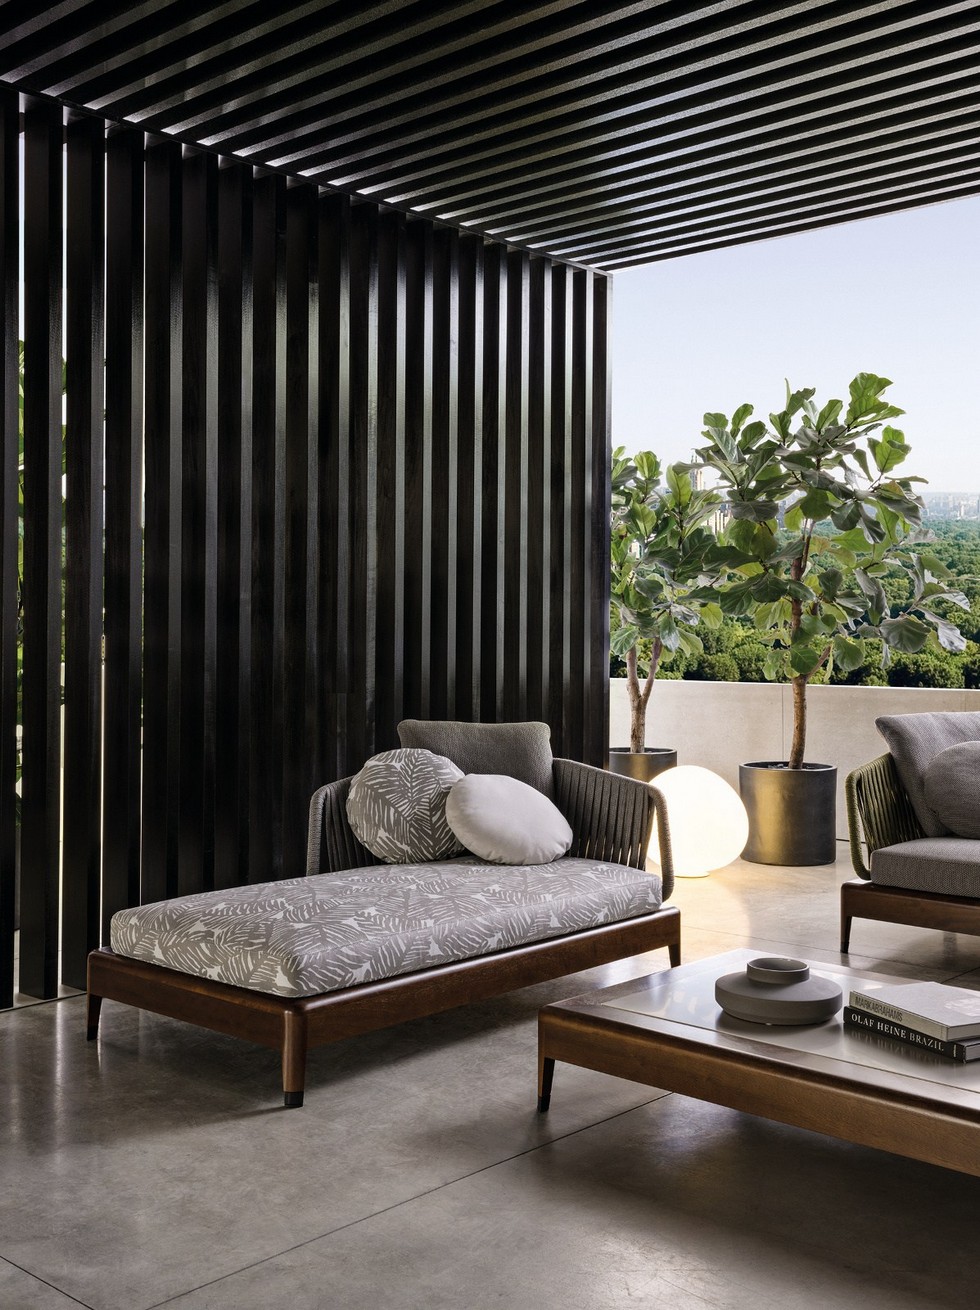 Italian furniture brands - Minotti new project for outdoor